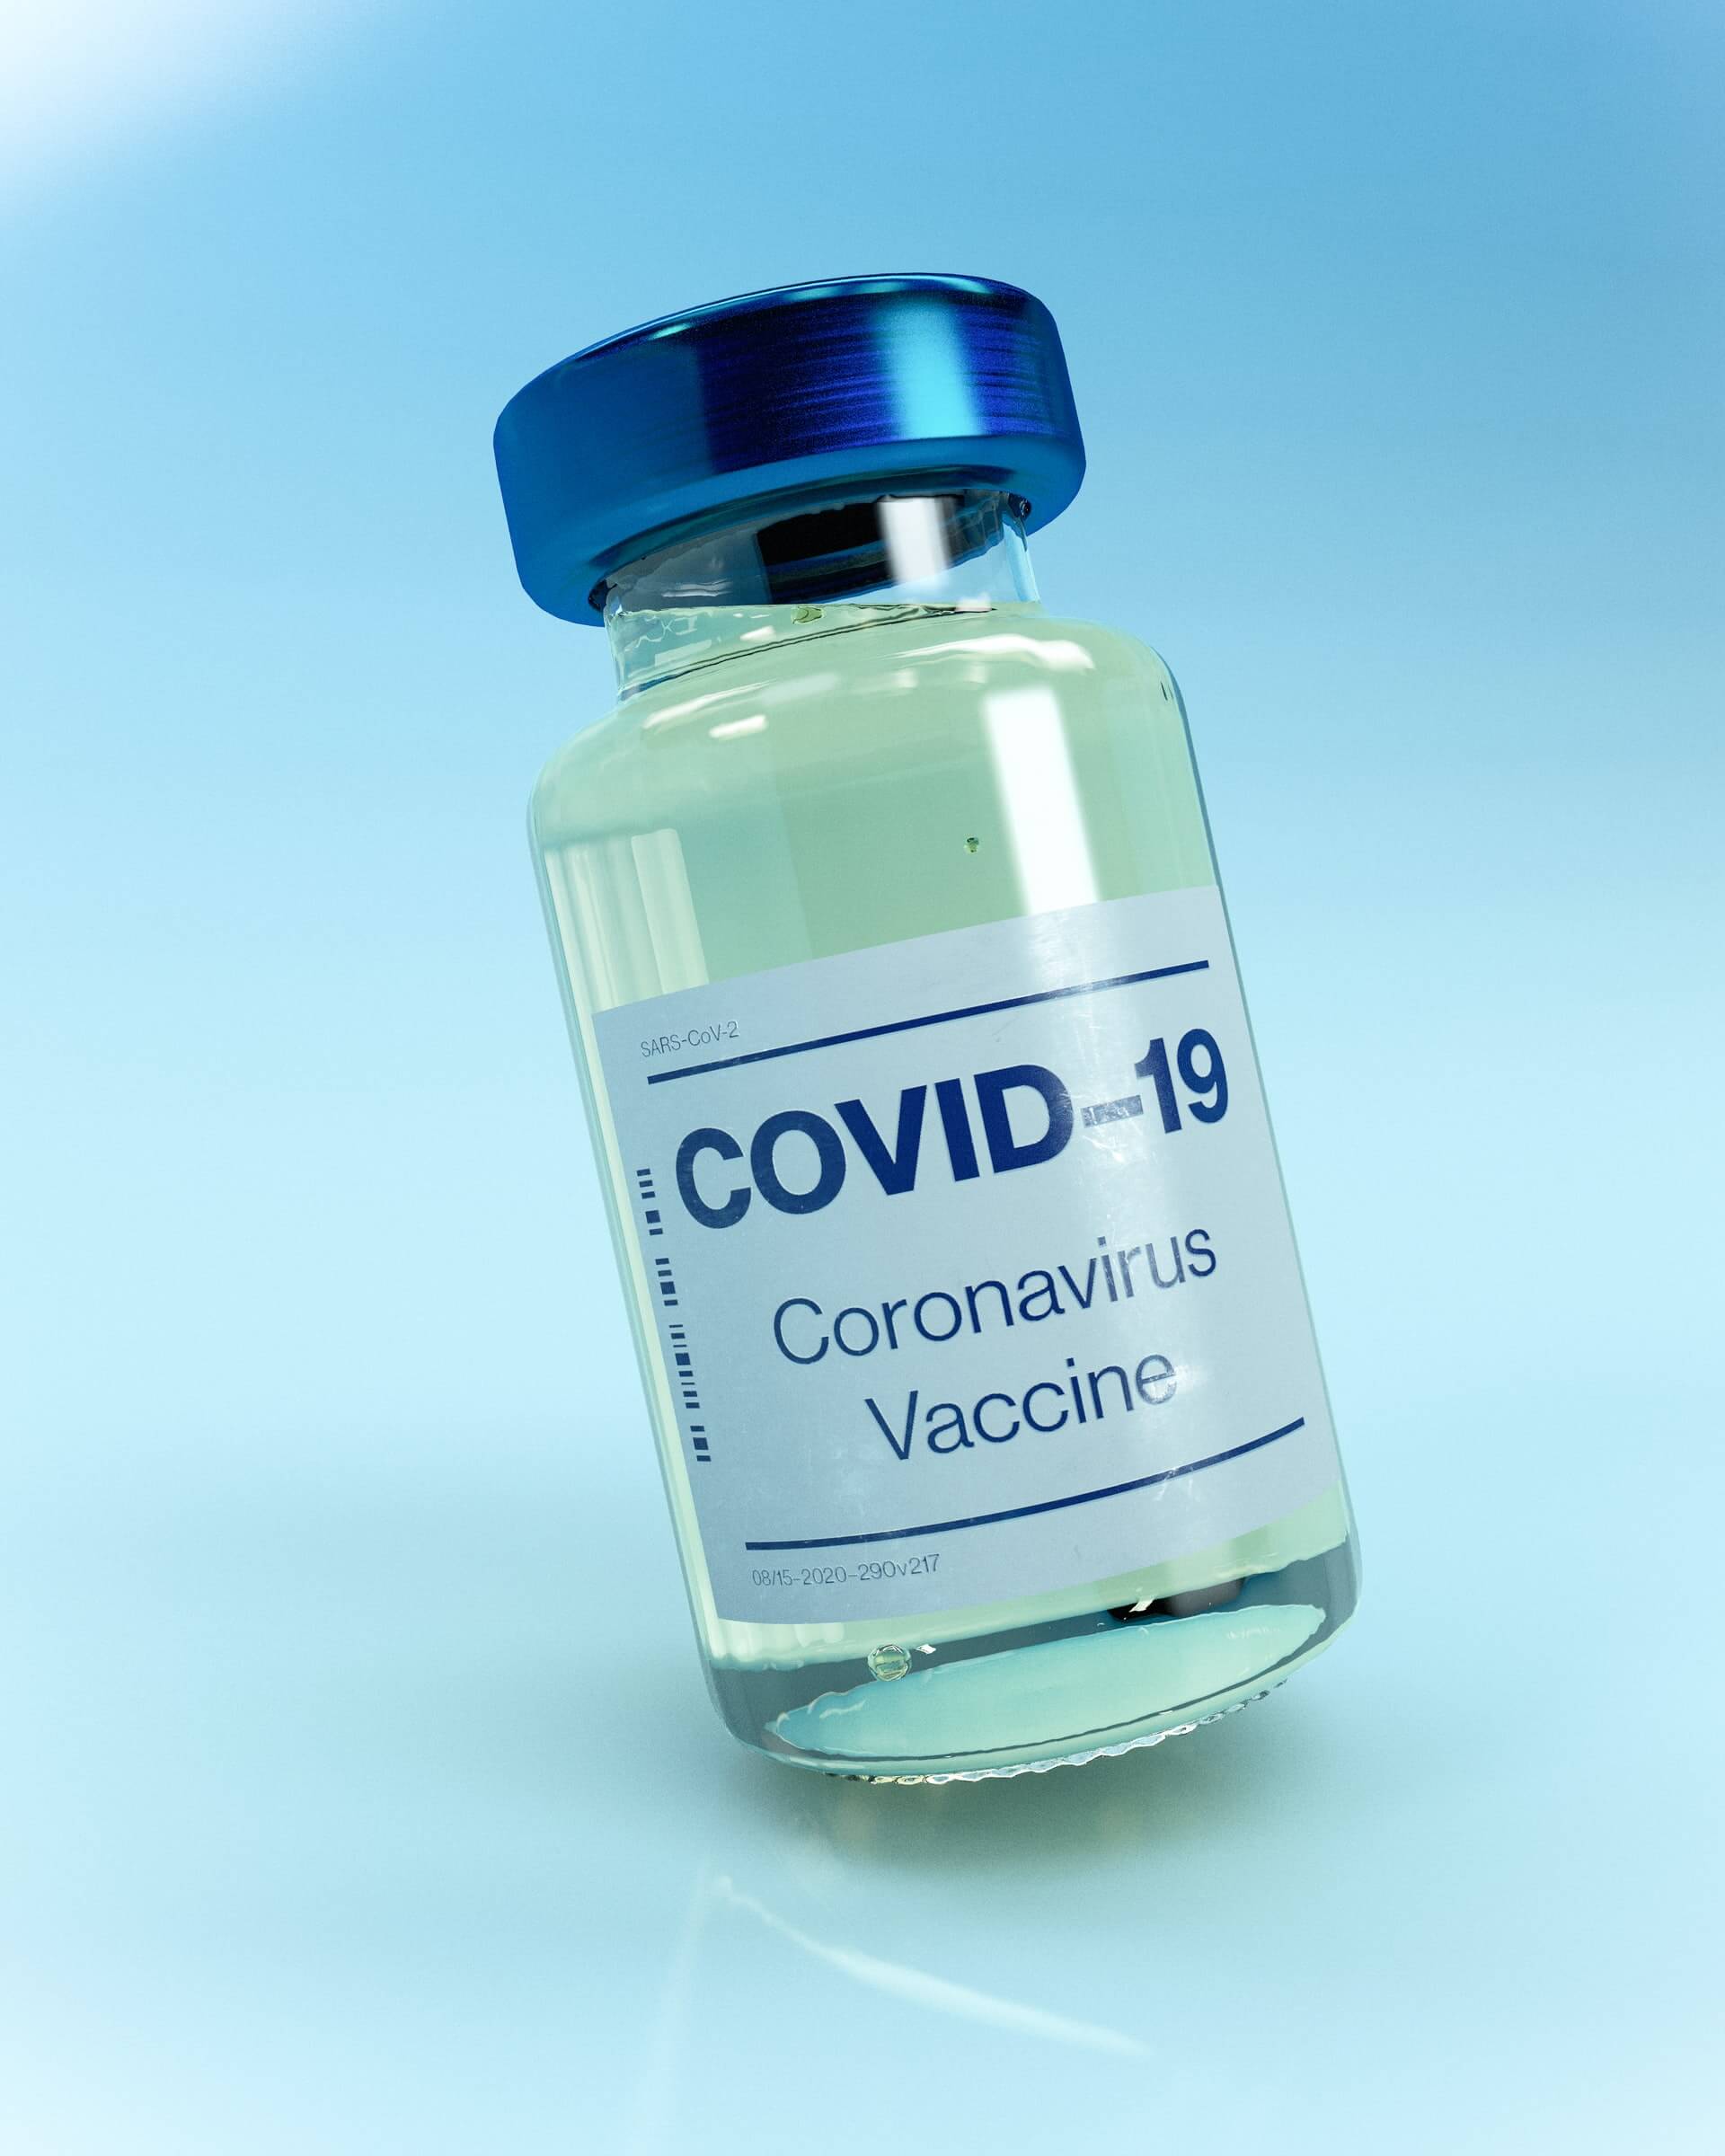 Covid-19 vaccine vial on blue background